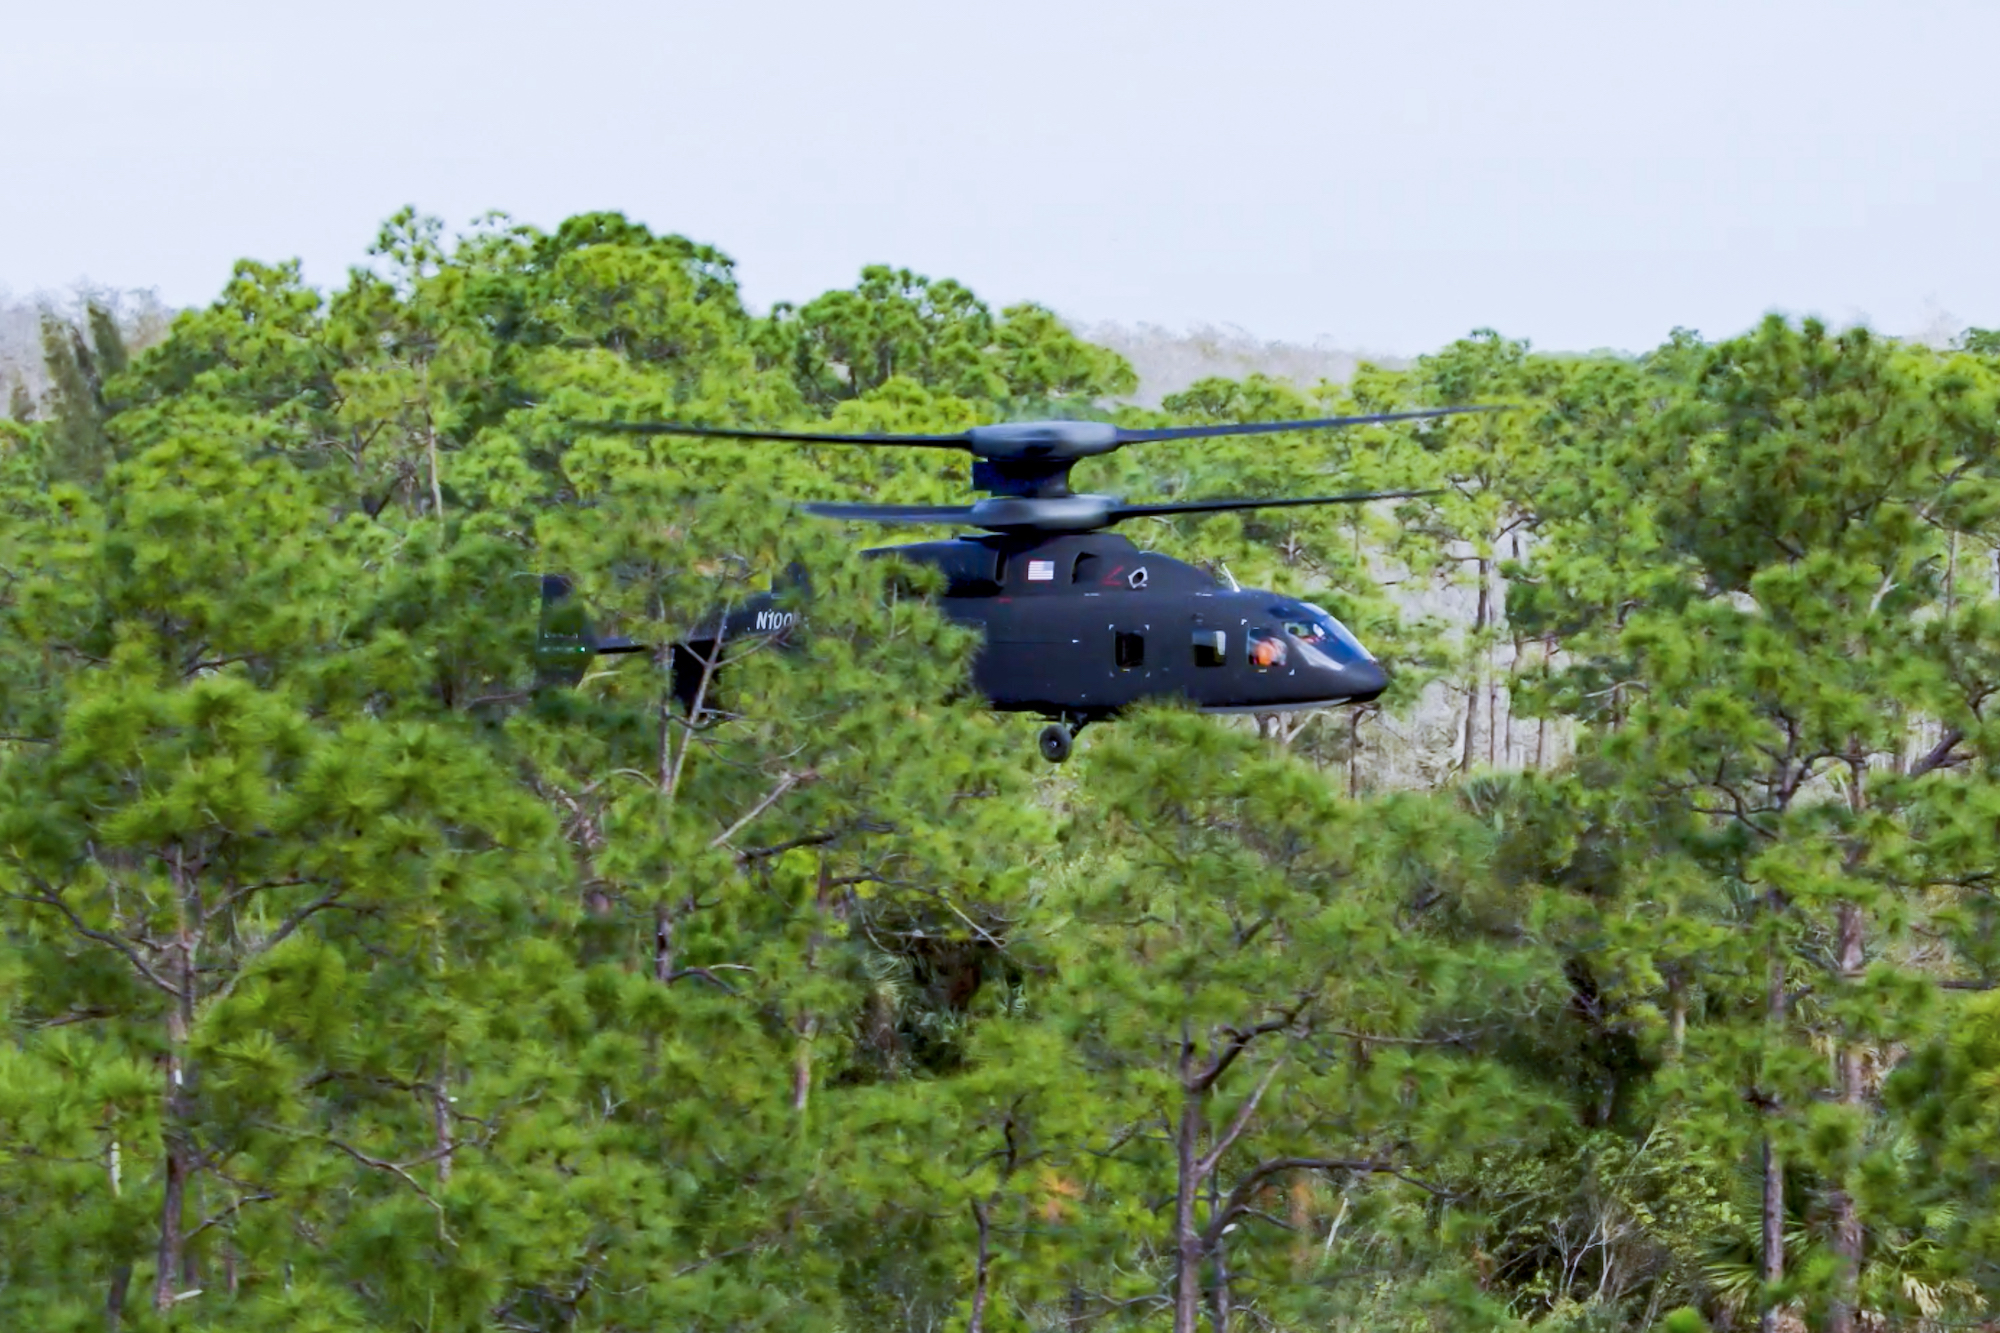 Check out the helicopter vying to be the next Black Hawk